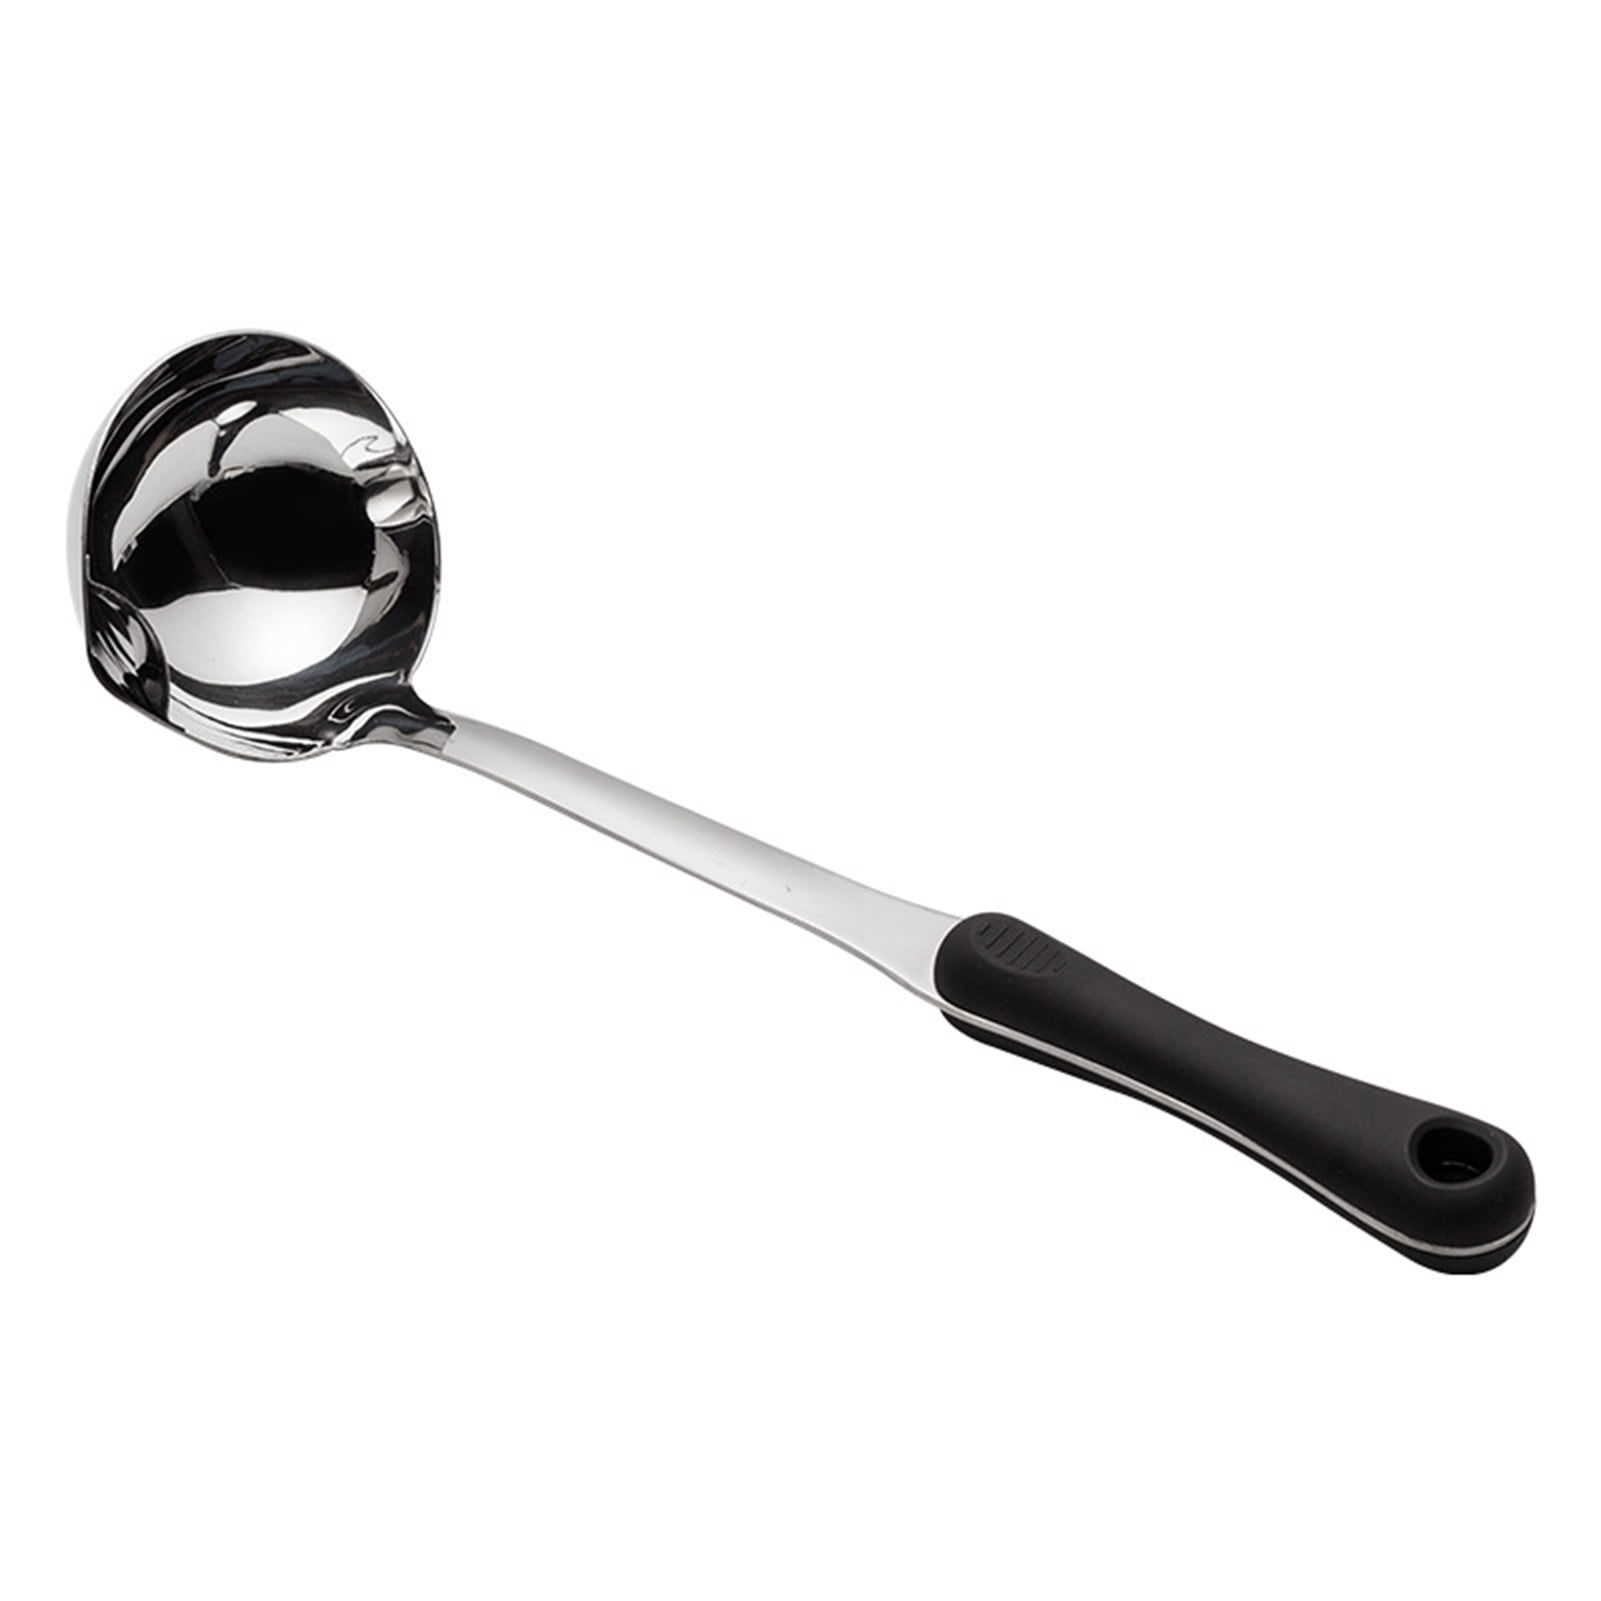 Soup Ladle with Long Handle and Ample Bowl Capacity Perfect for Stirring,Serving Soups and More Smilyokach Stainless Steel Ladle with Comfortable Grip